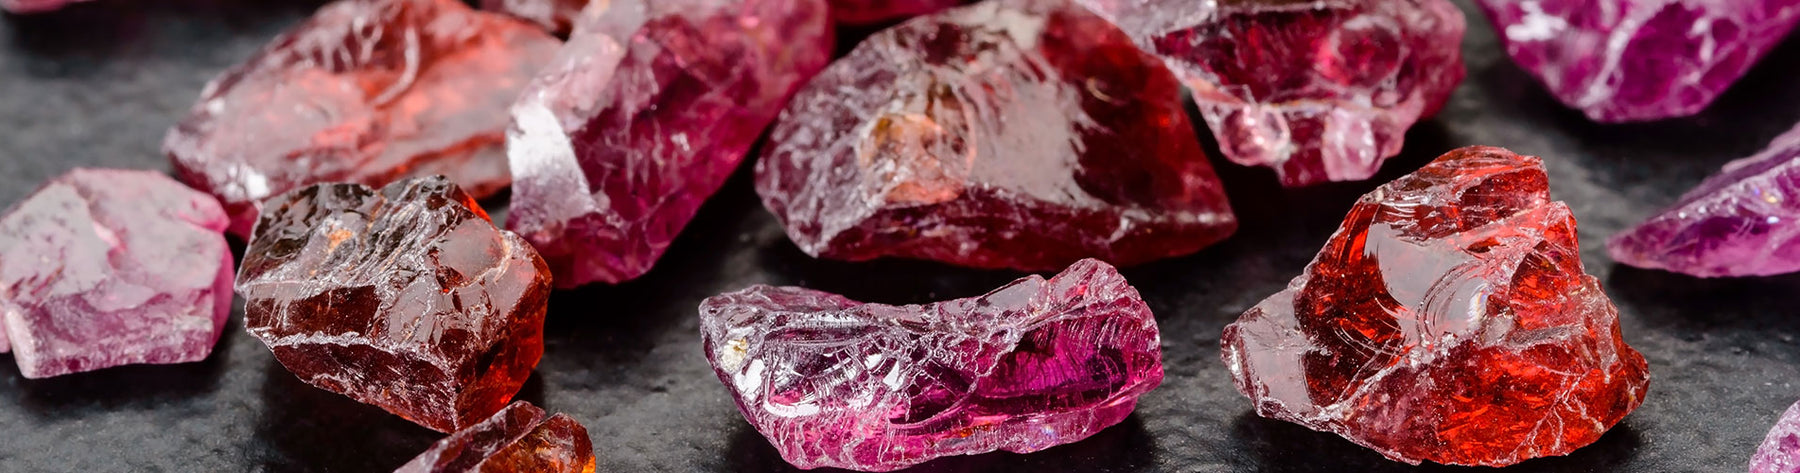 The 11 Most Popular Gemstone Colors In The World